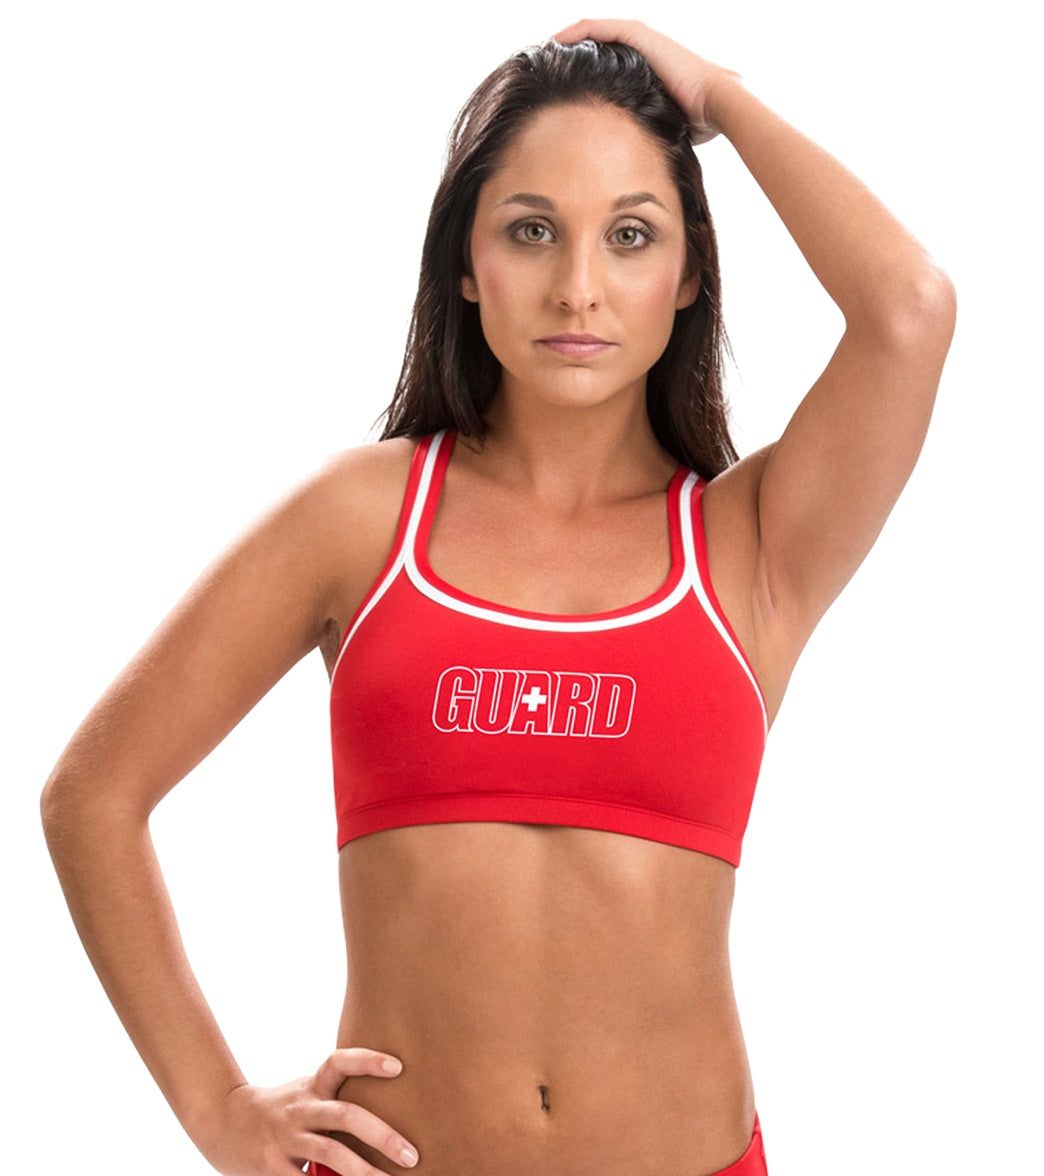 Womens Sports Swimsuit Set With Bra, Vest, And Red Workout